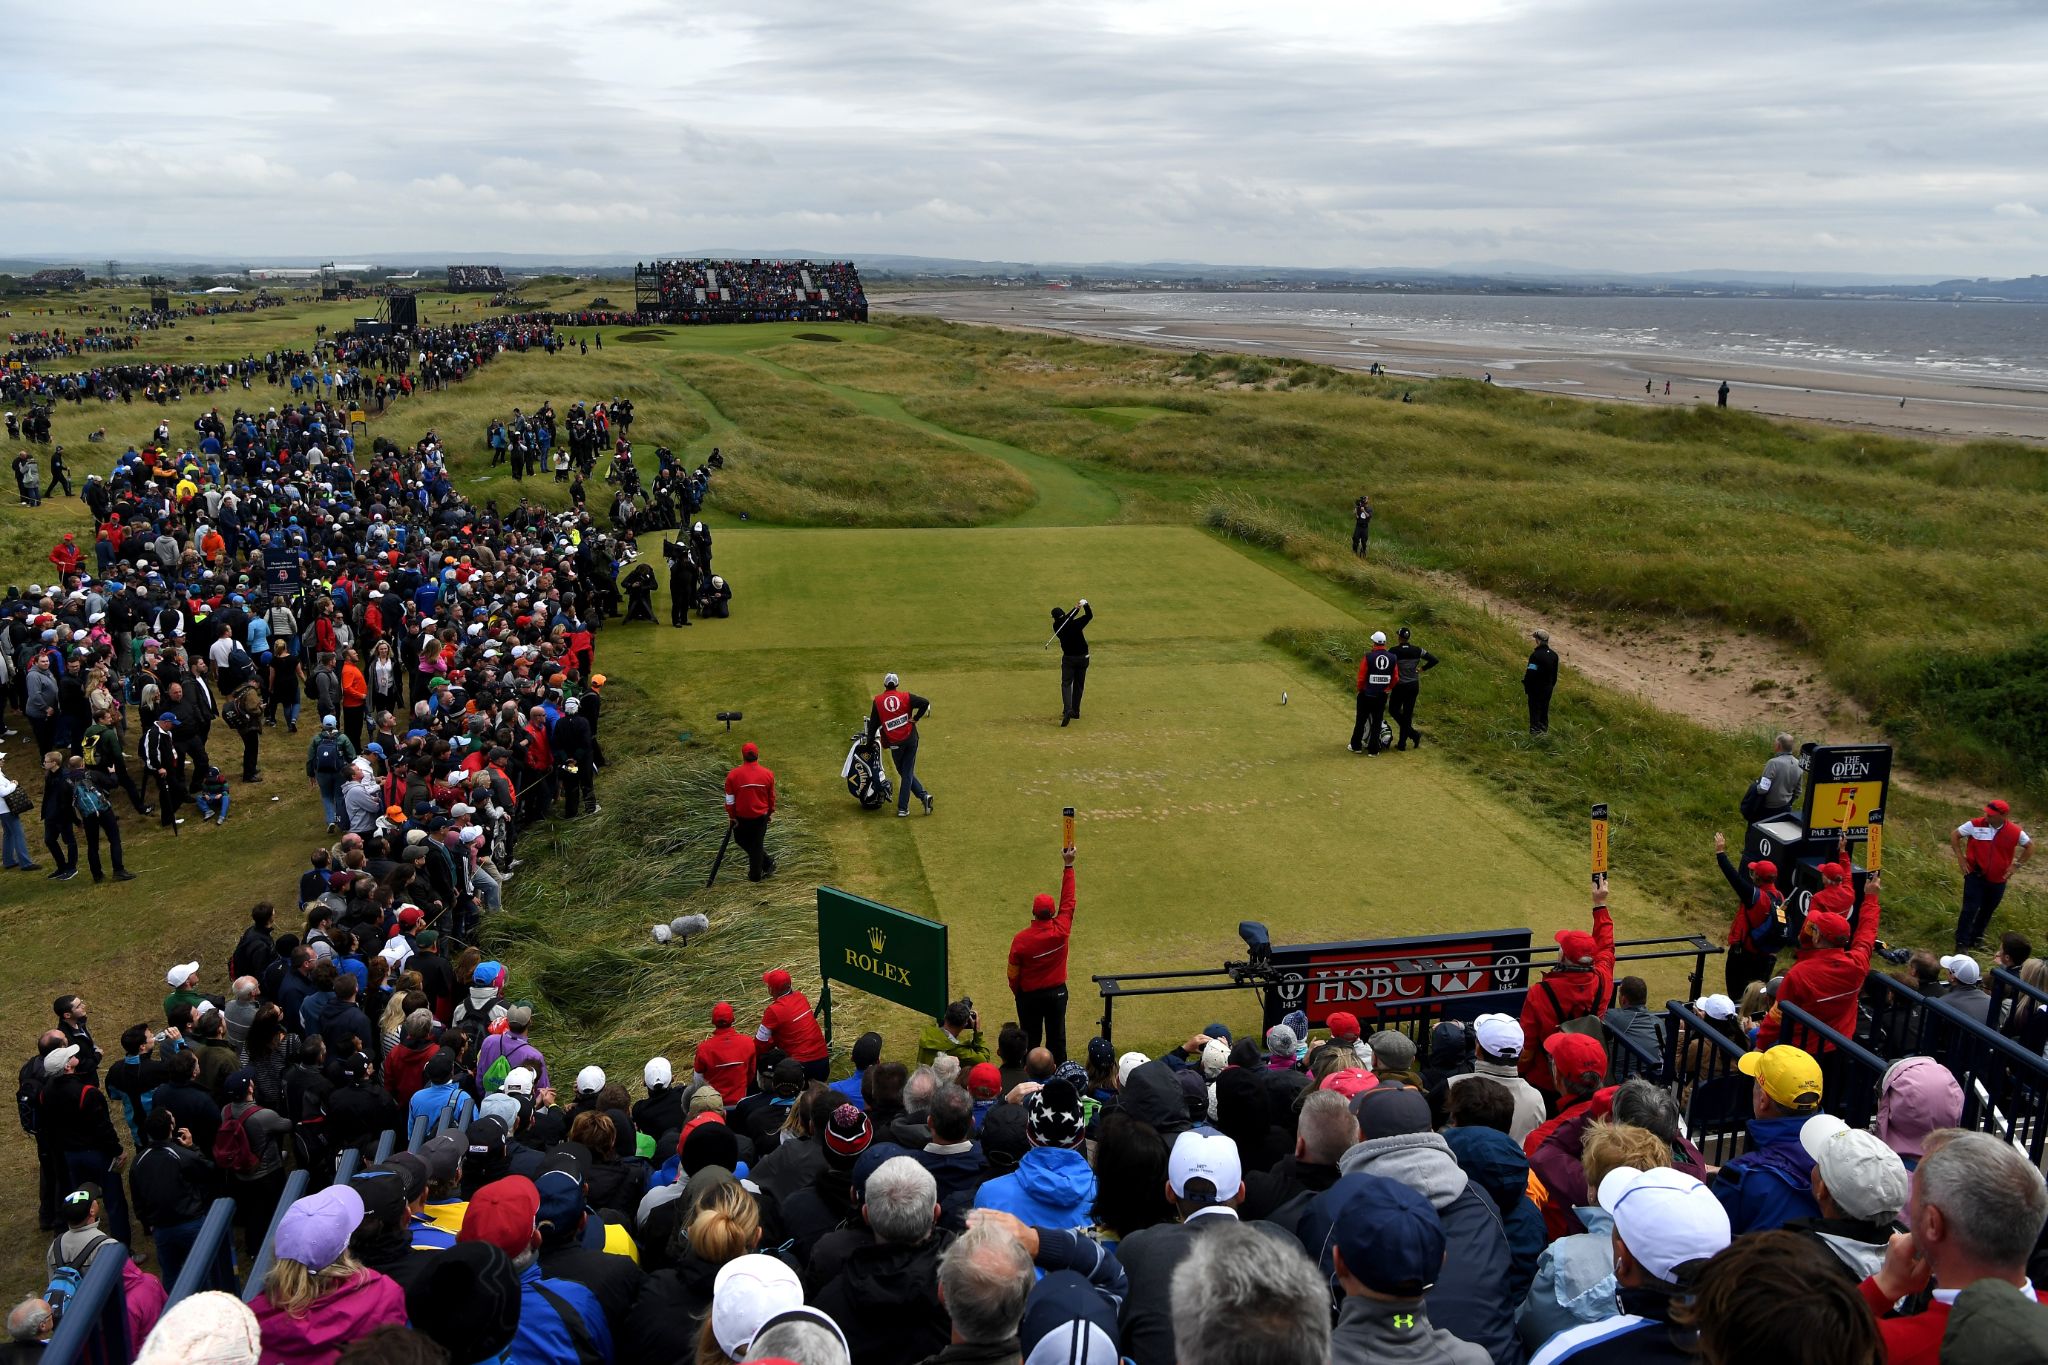 The 152nd Open at Royal Troon VisitScotland